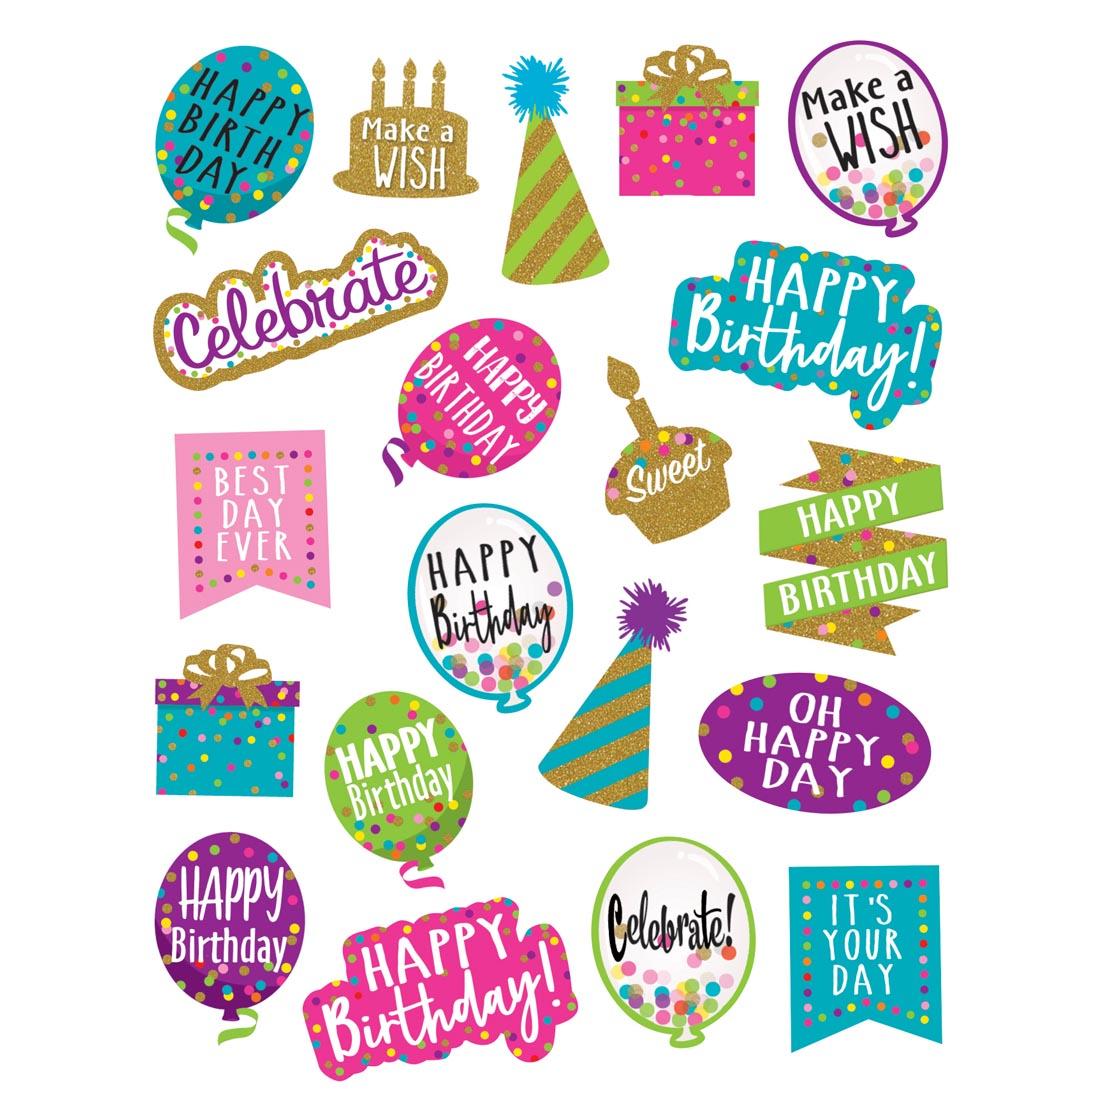 Happy Birthday Stickers from the Confetti collection by Teacher Created Resources